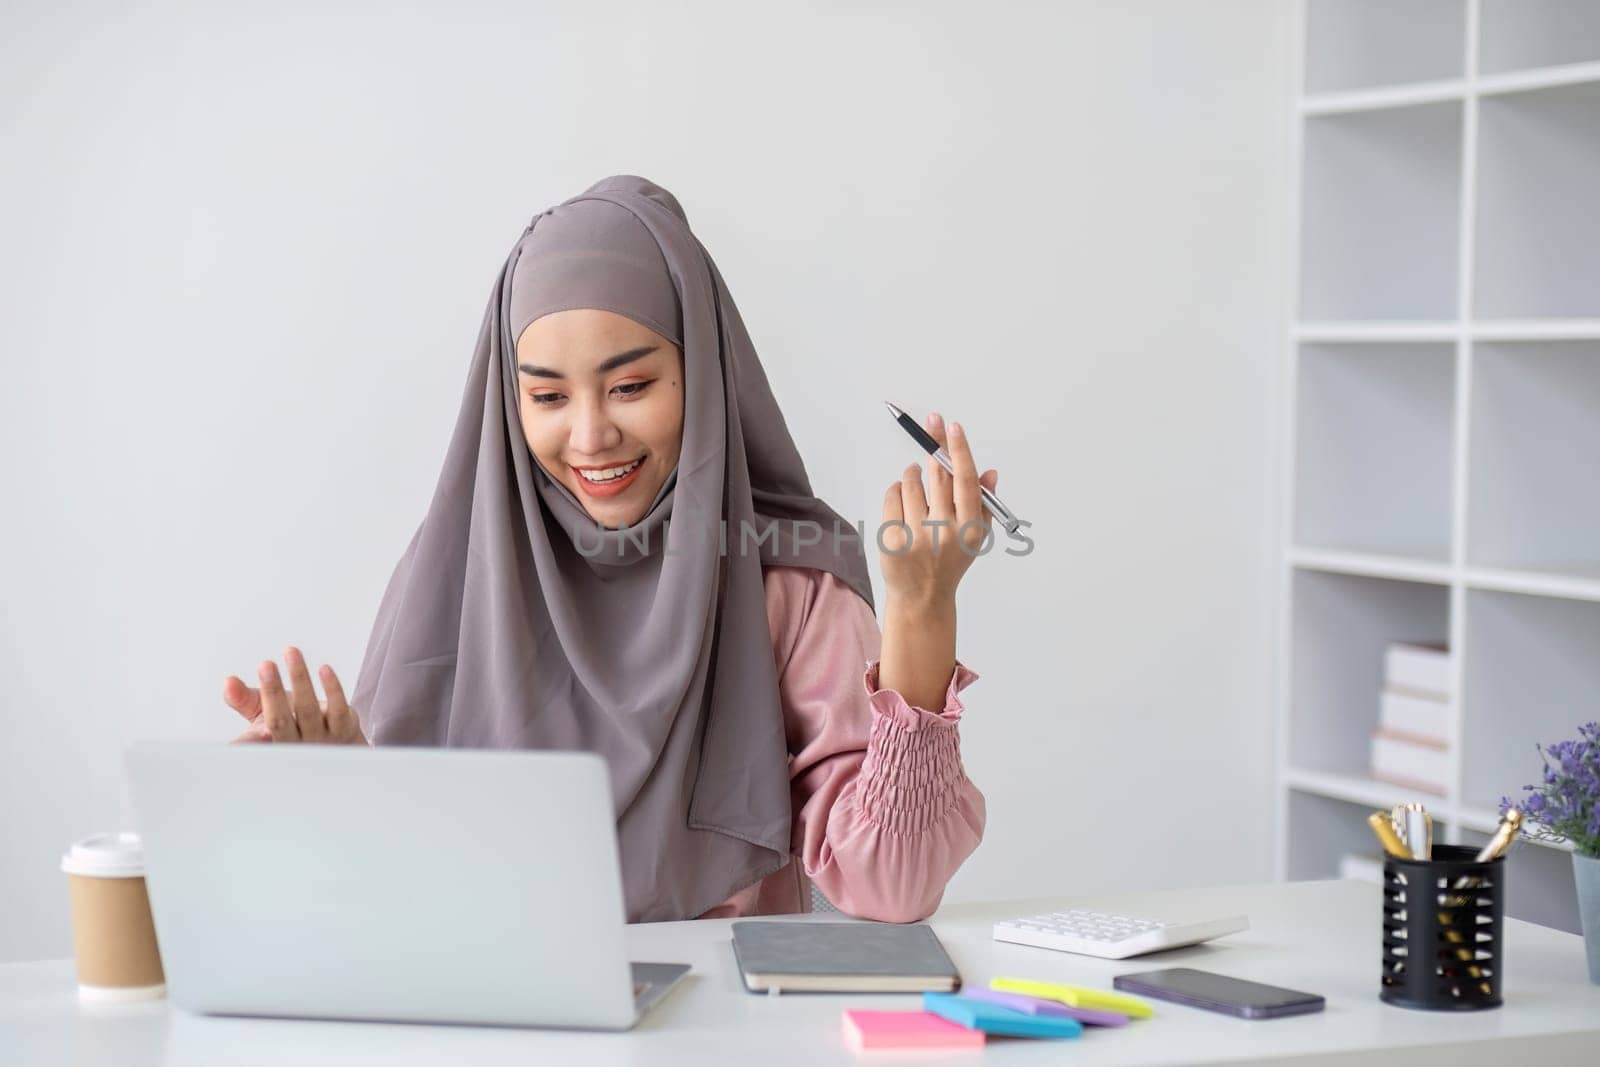 Smiling Muslim business woman Wearing a hijab while chatting online on a work desk in the office. by wichayada